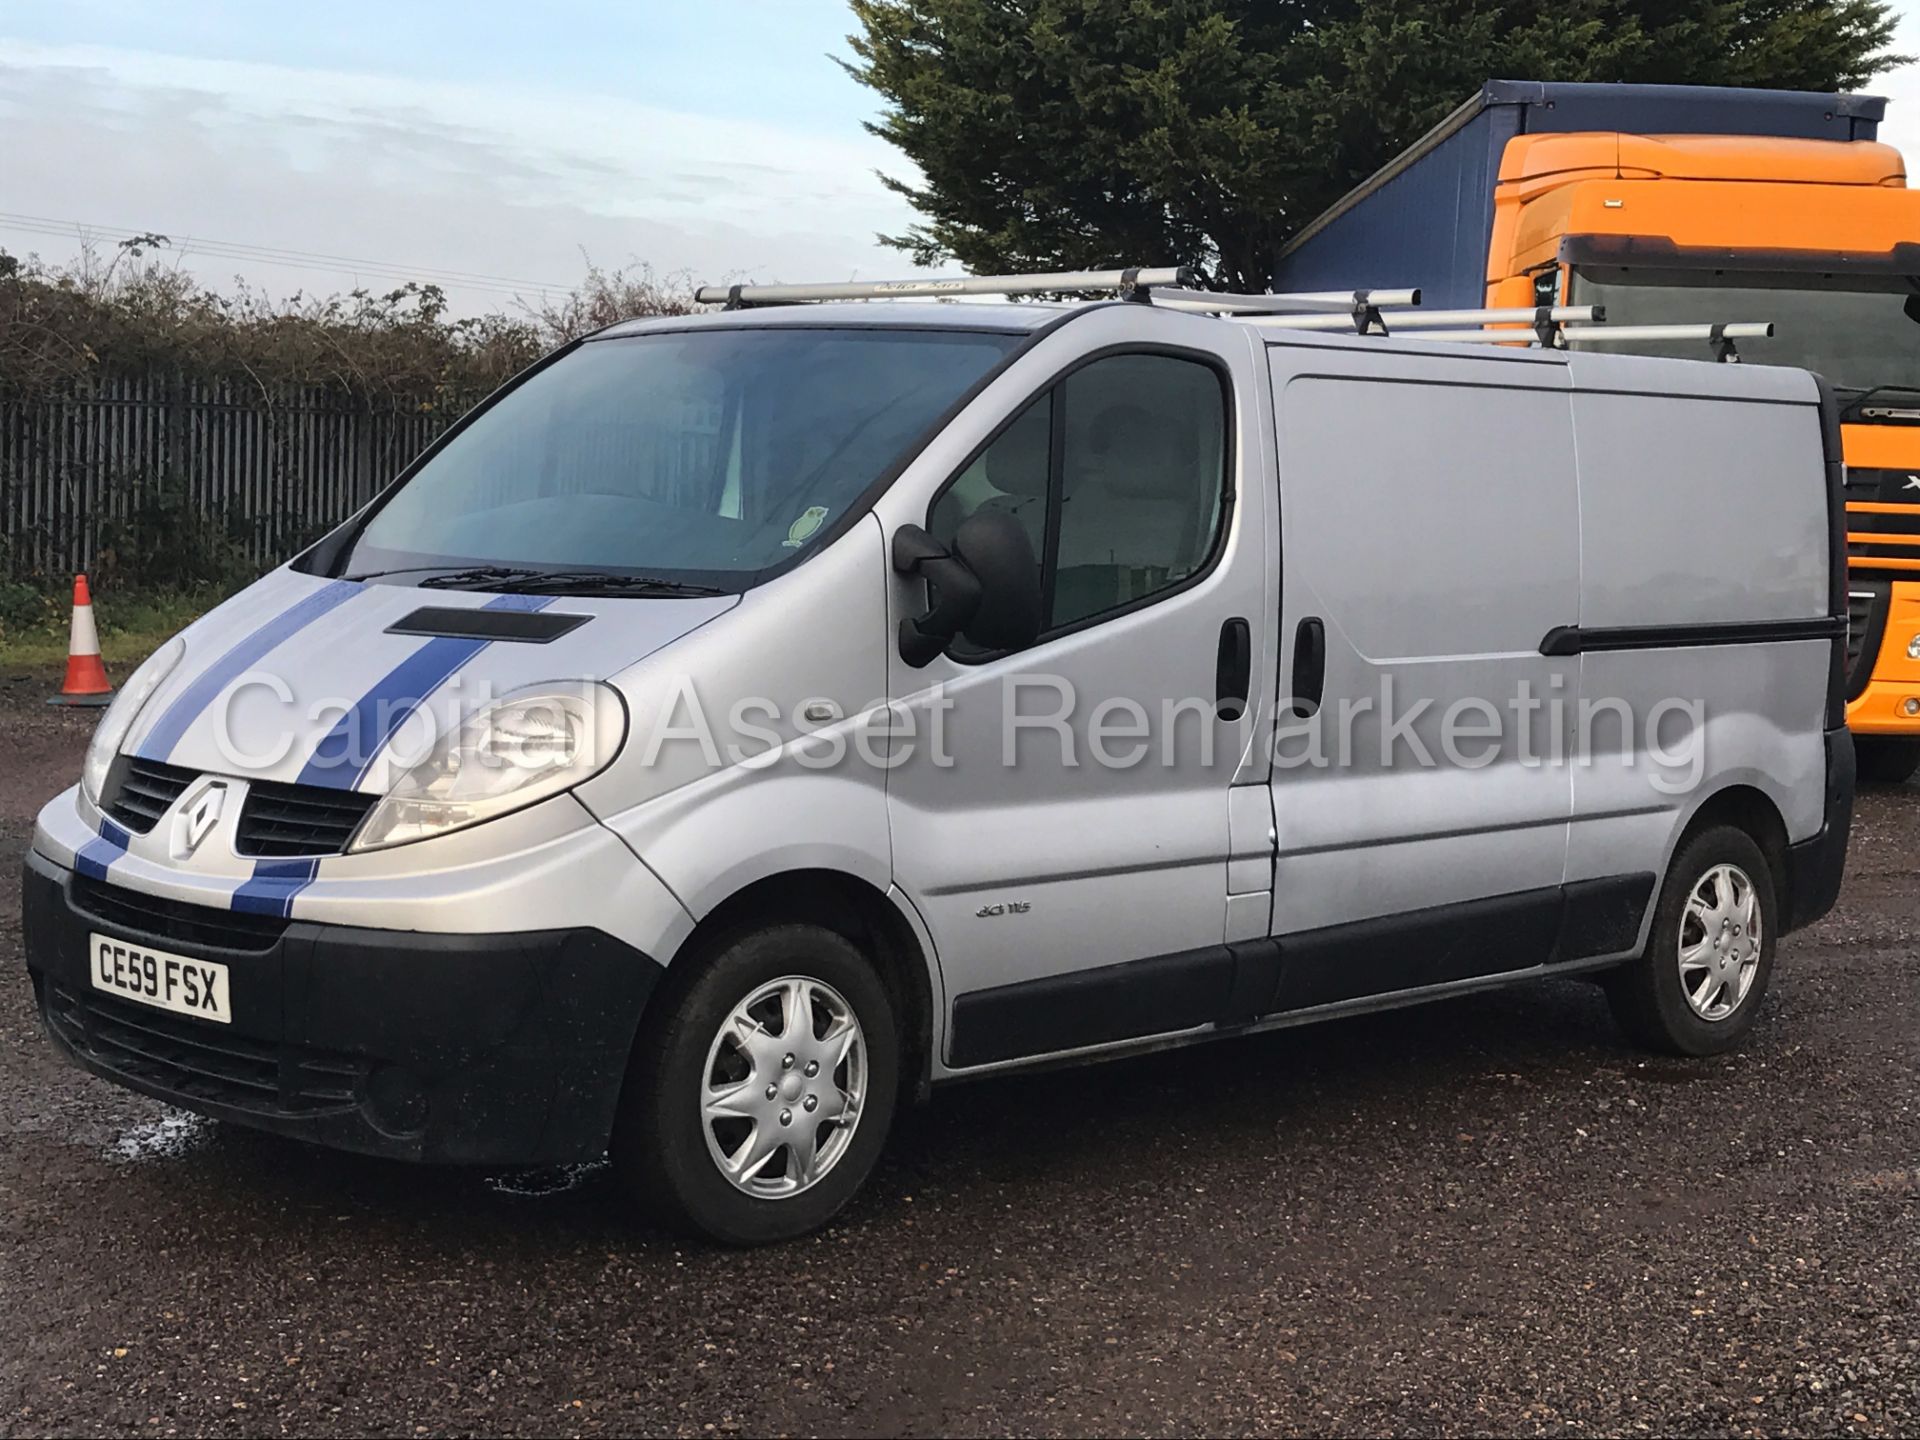 RENAULT TRAFIC LL29 DCI 115 (2010 MODEL) '2.0 DCI - 115 PS - 6 SPEED - LWB' **AIR CON** - Image 5 of 20